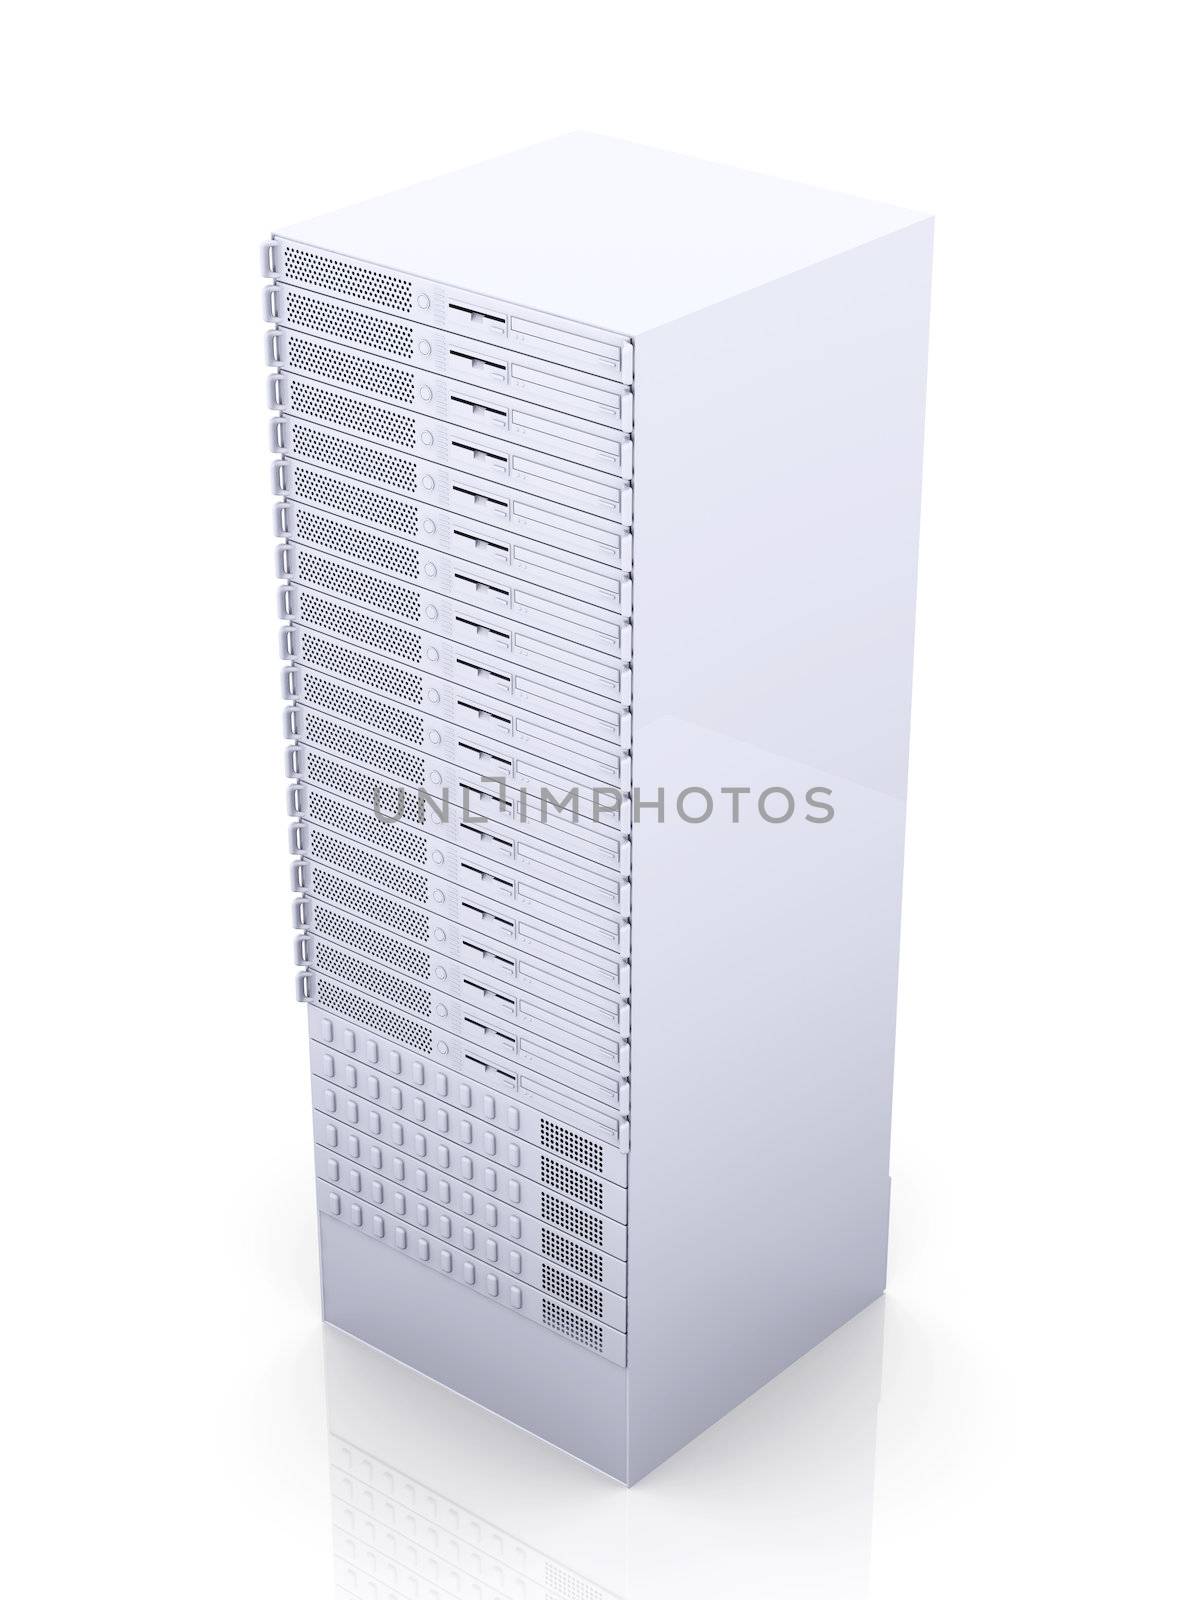 19inch Server tower	 by Spectral